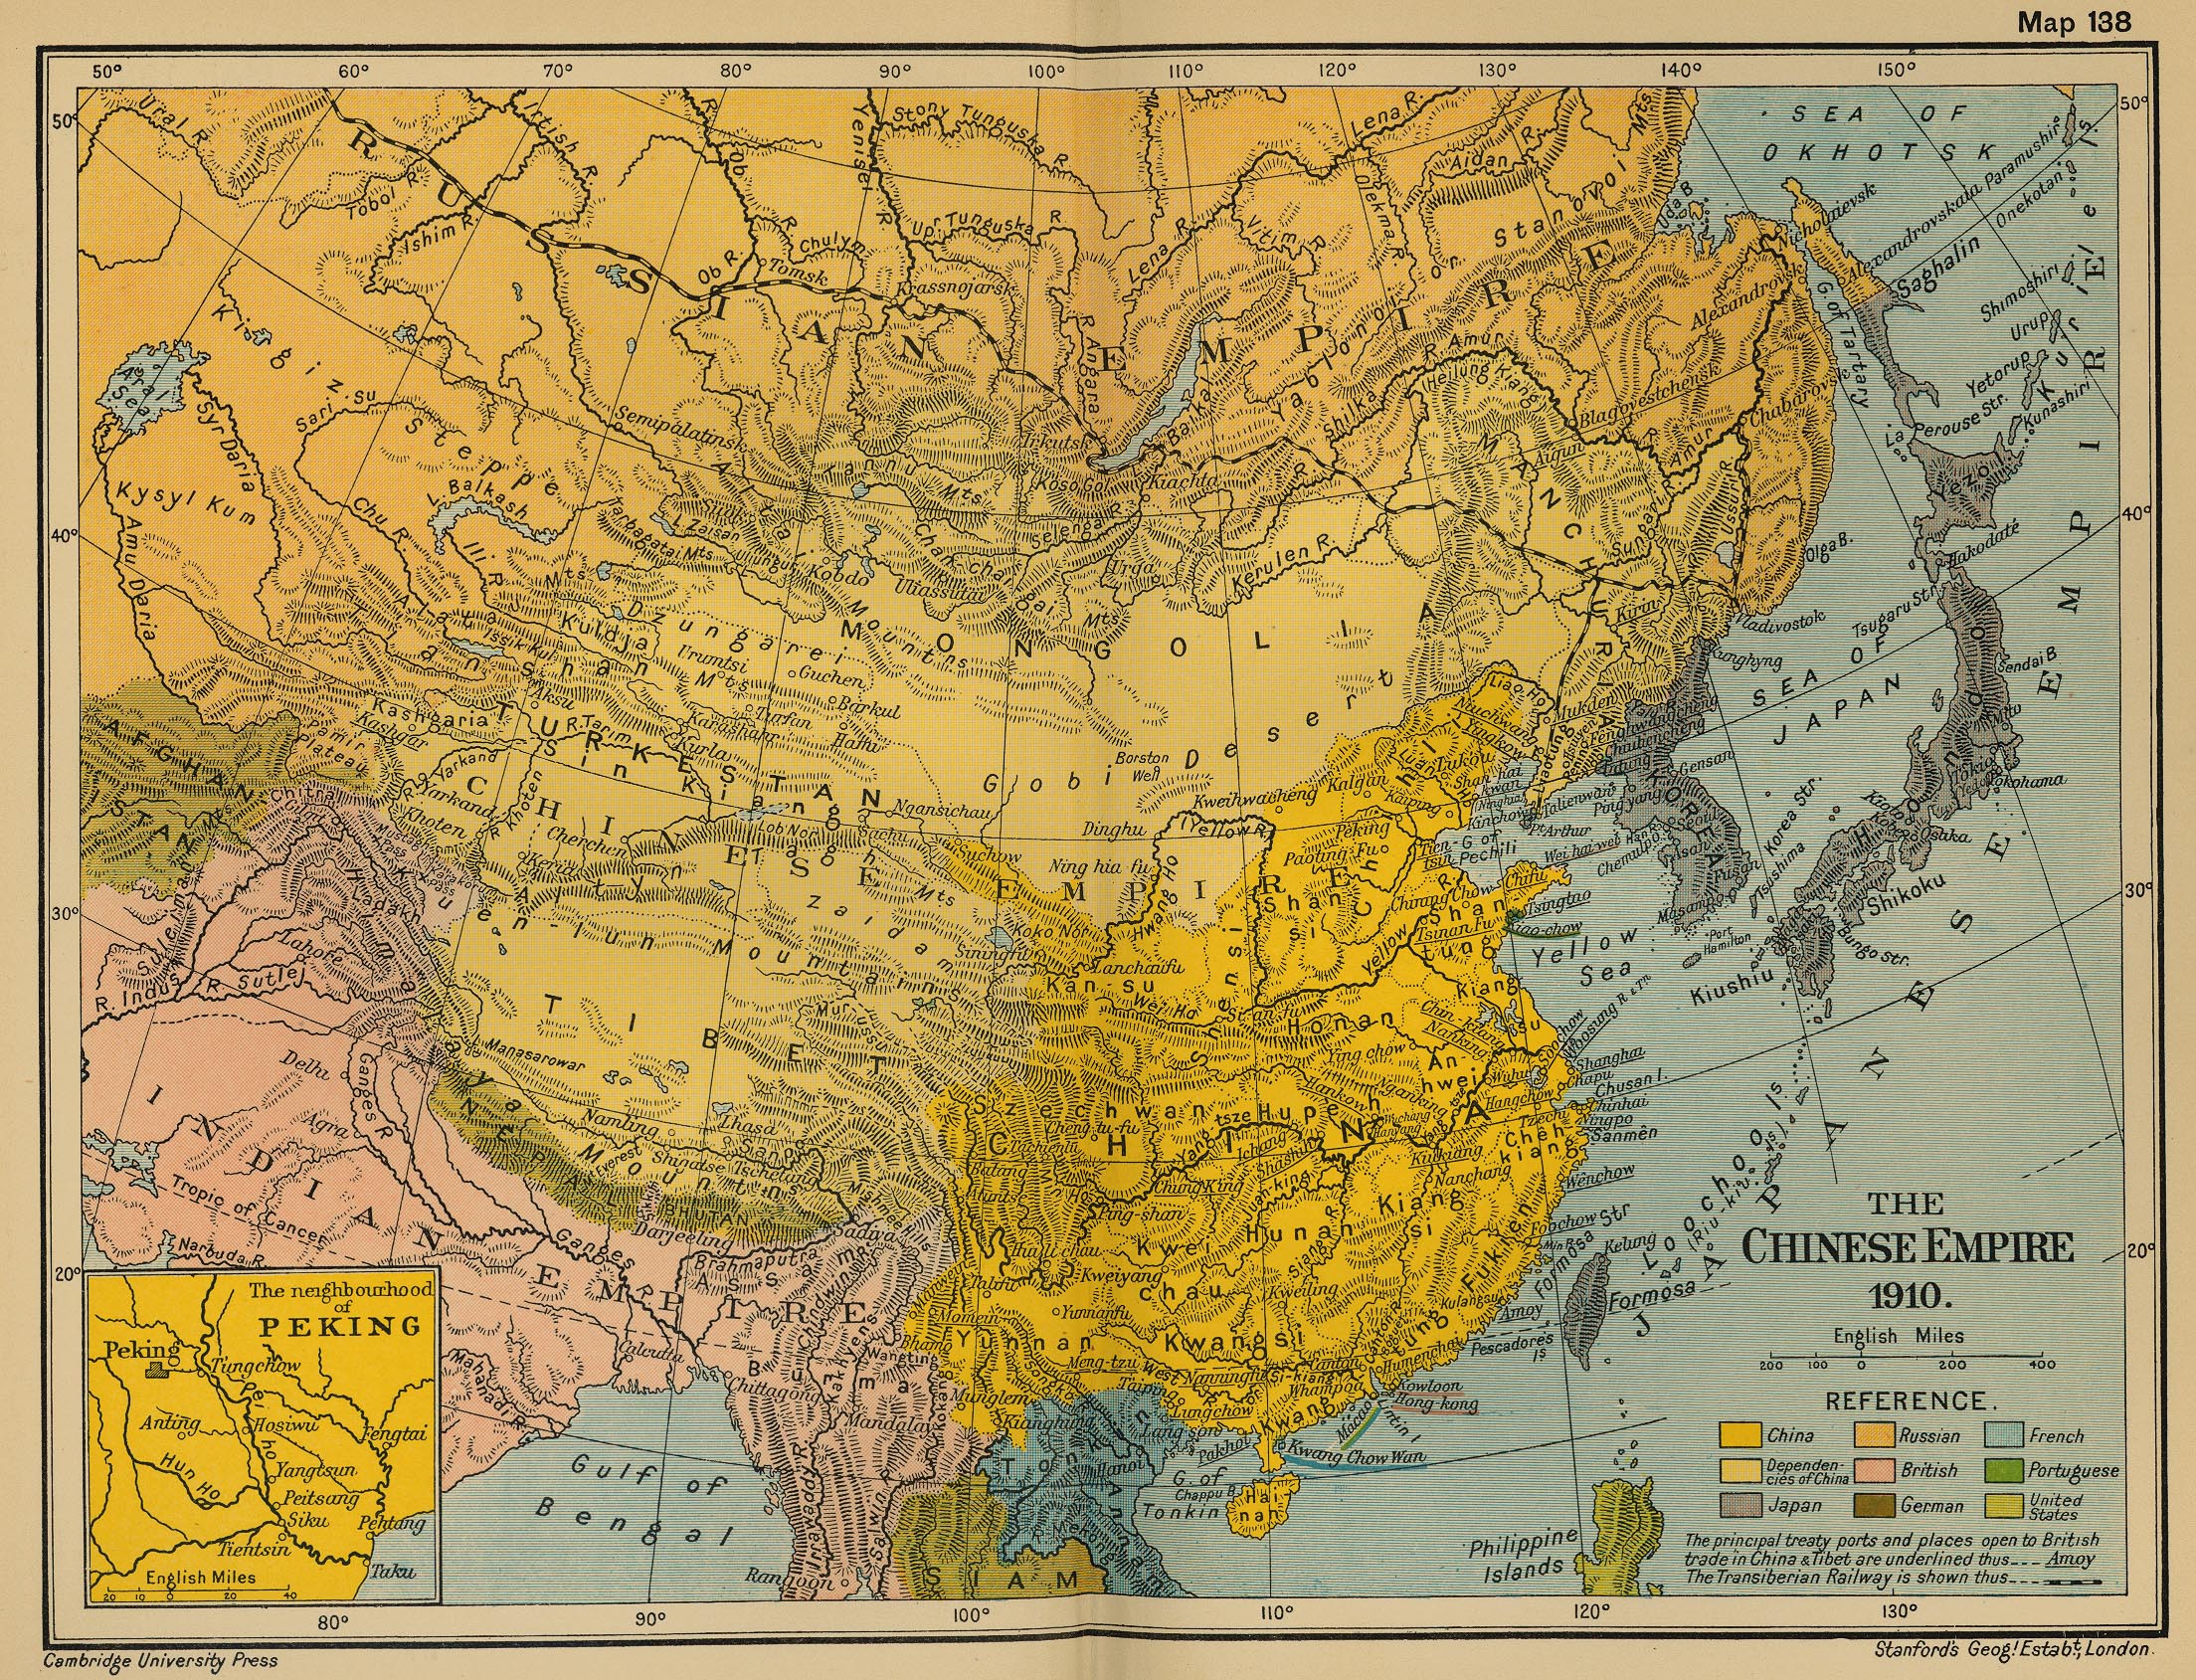 Map of the Chinese Empire 1910